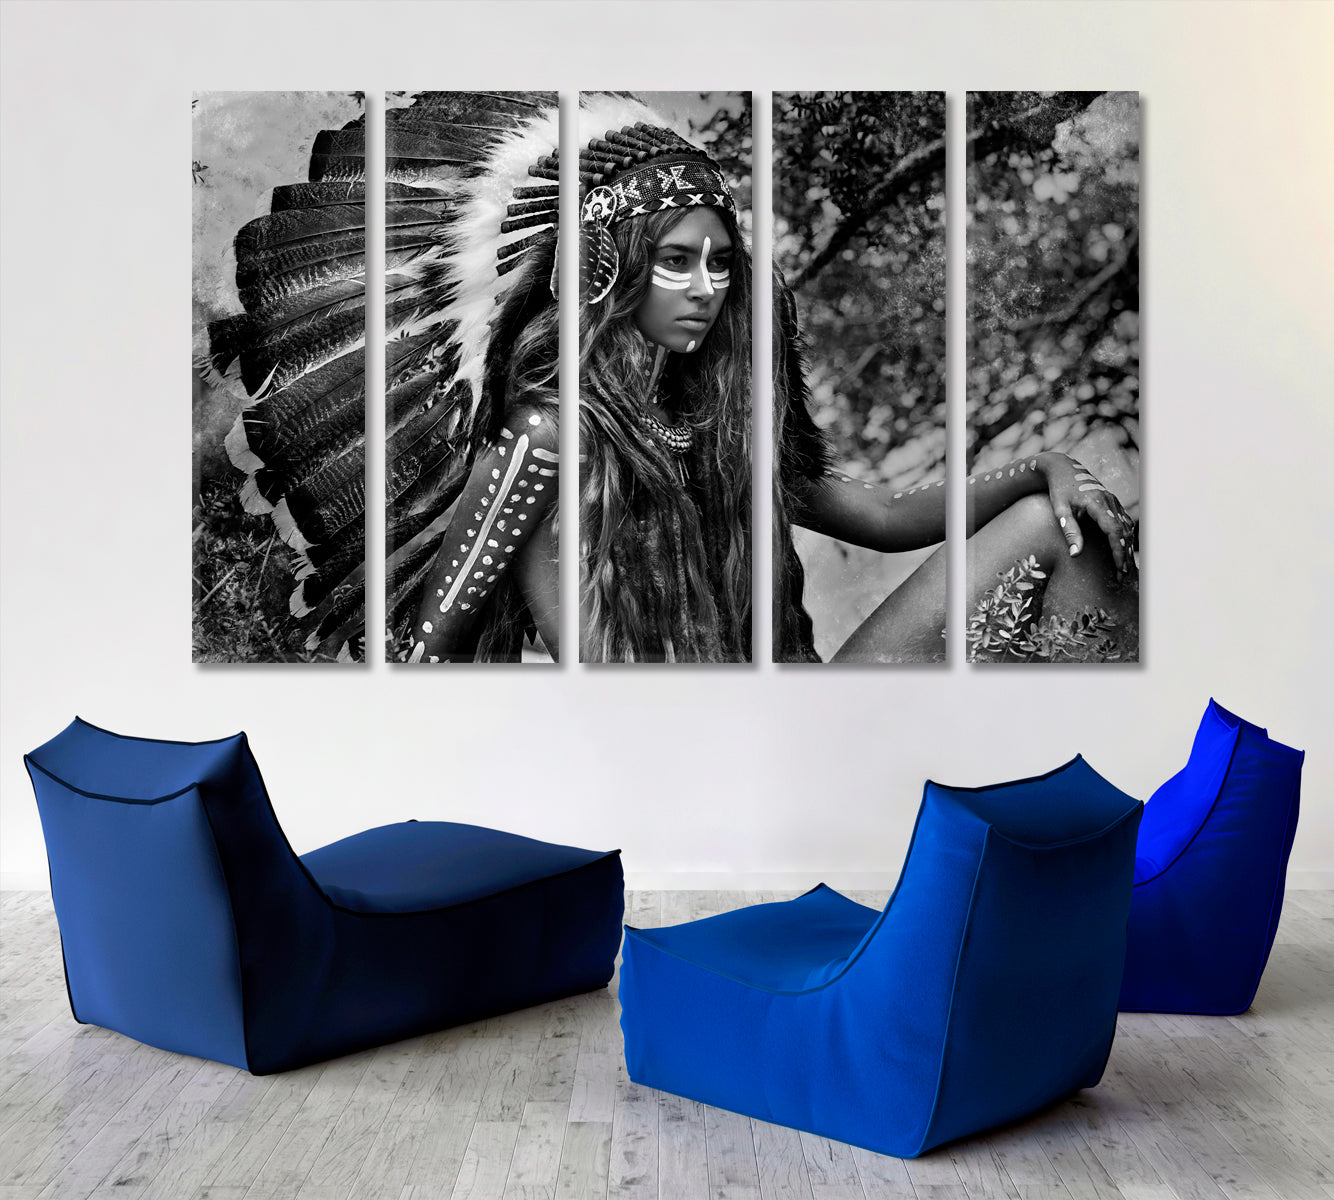 CHIEFTAIN Attractive Indian Woman Black And White Portrait Photo Art Artesty 5 panels 36" x 24" 